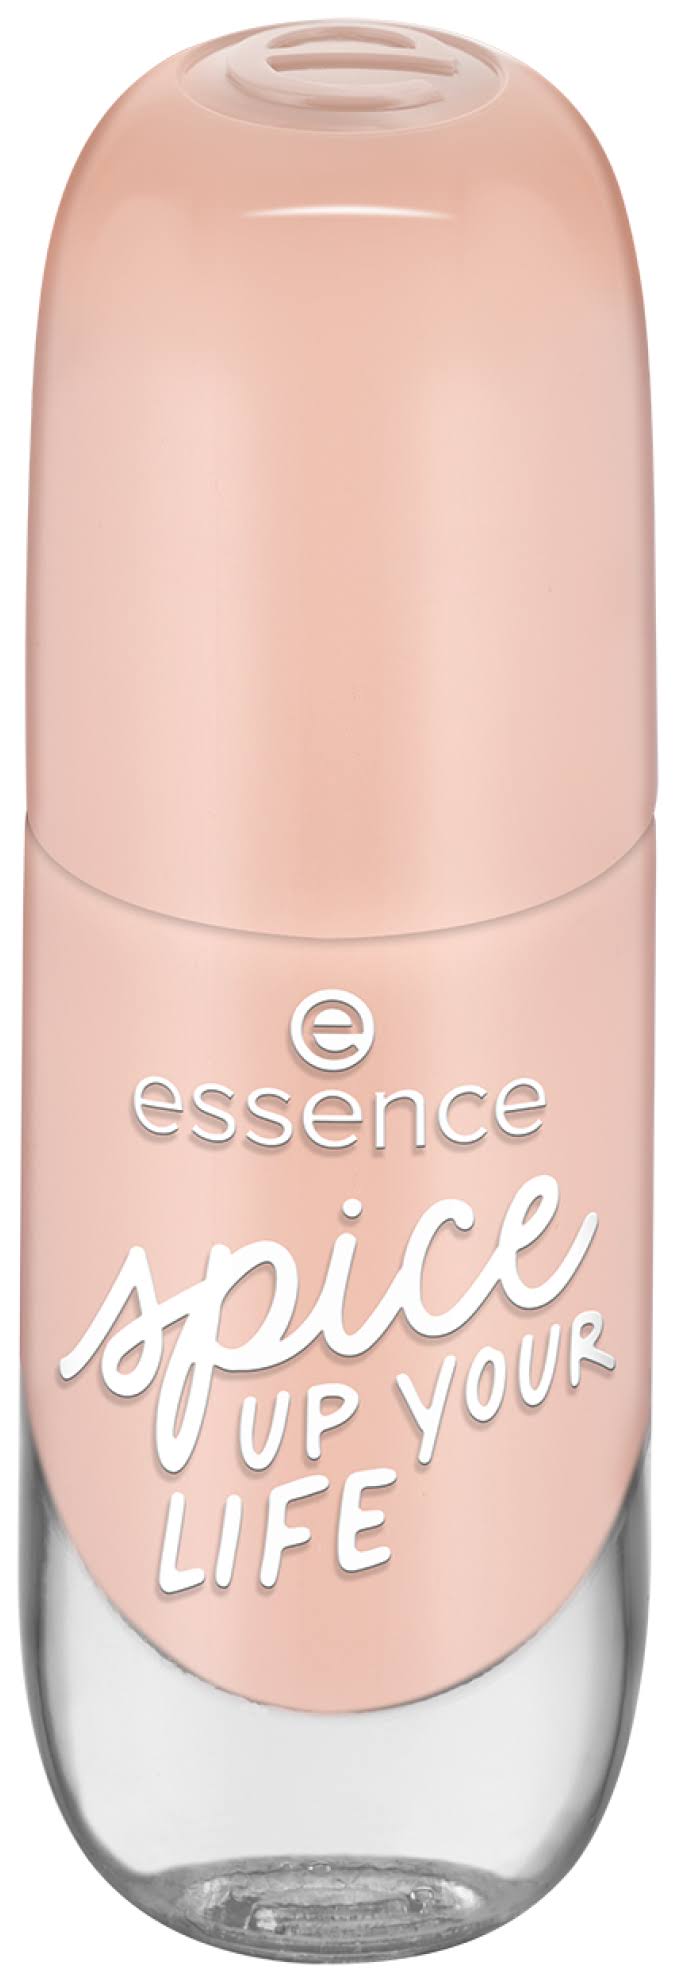 Essence Nail Polish 09-spice Up Your Life (8 ml)